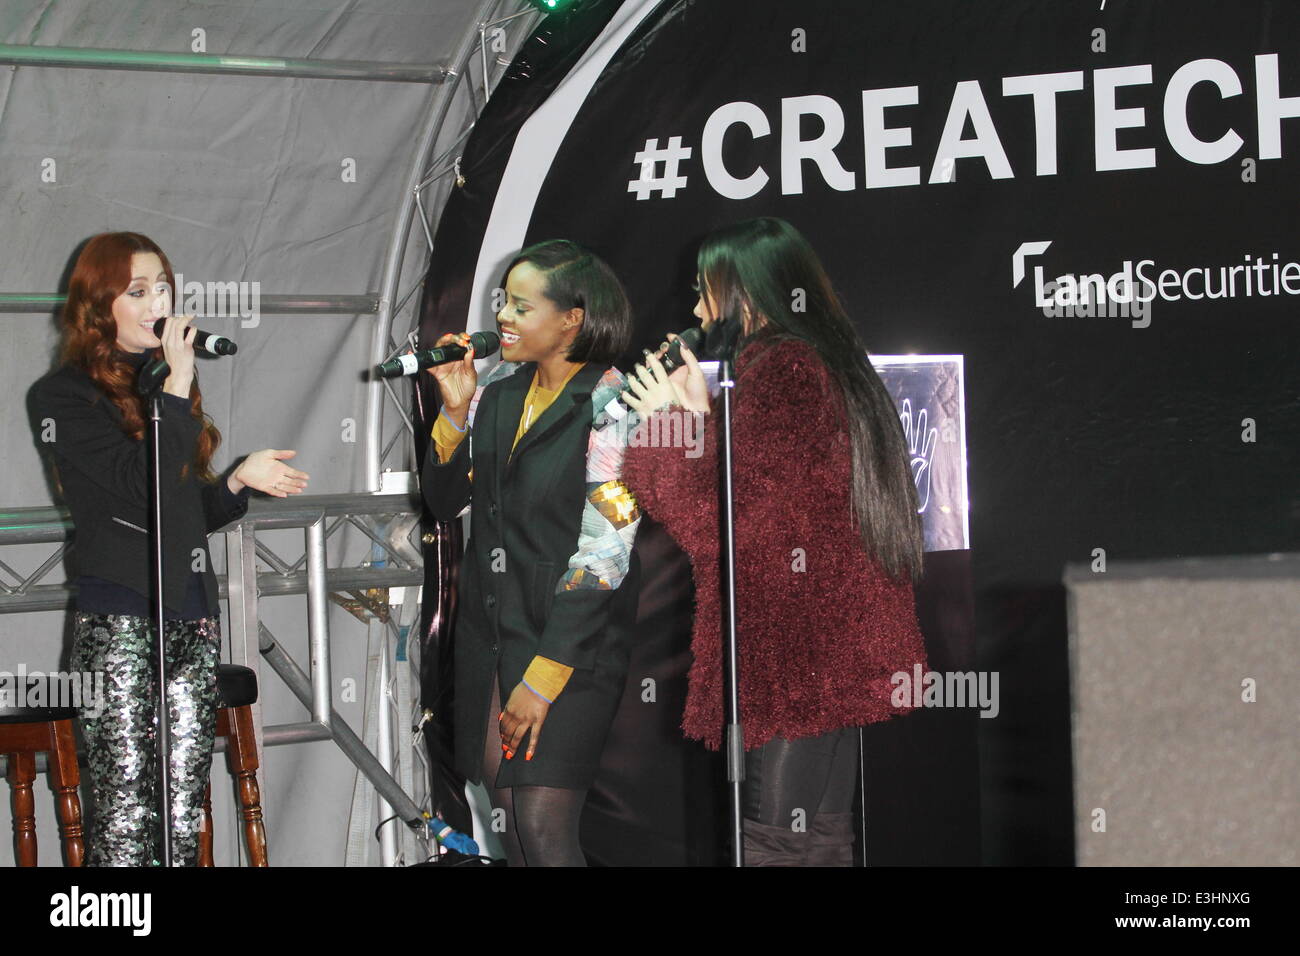 Mutya, Keisha, Siobhan (former and founding members of the Sugababes) perform live at the launch of the Create Christmas exhibition in the Cardinal Place shopping Centre in London's Victoria. The exhibition is made of giant photographs projected onto the Stock Photo